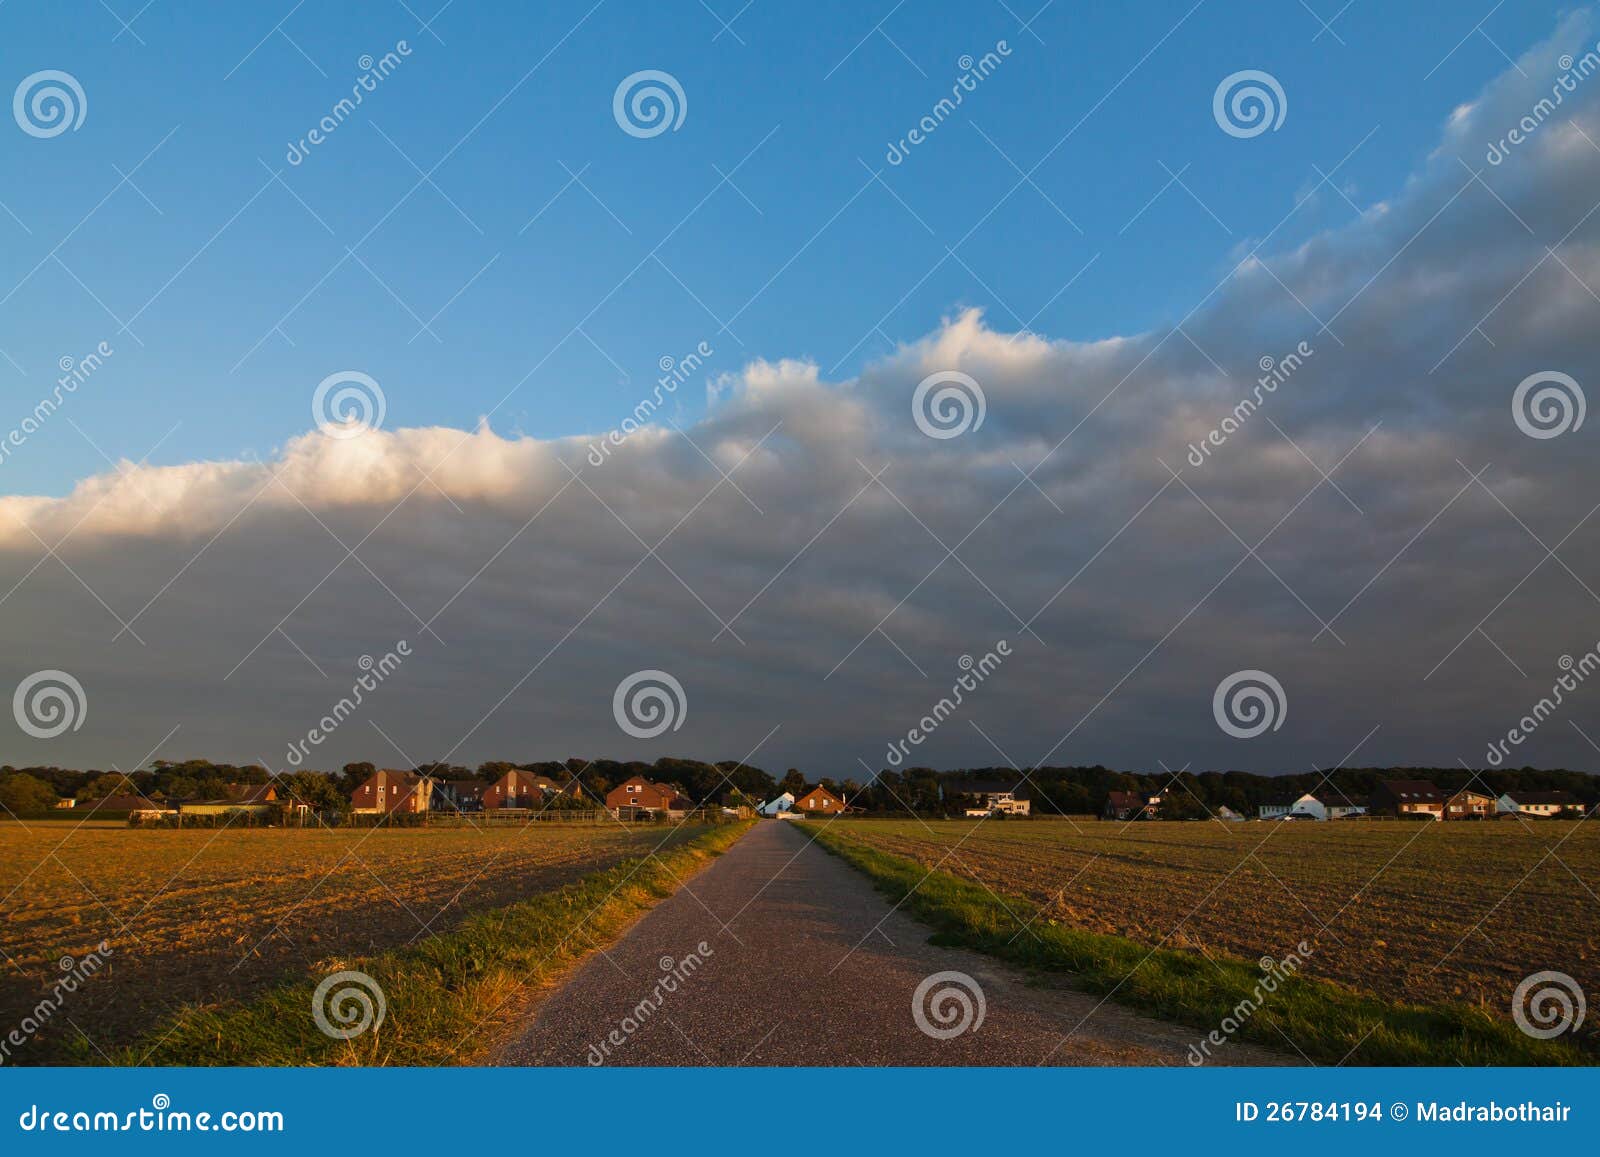 Picture of a country landscape with a country path leading to a ...